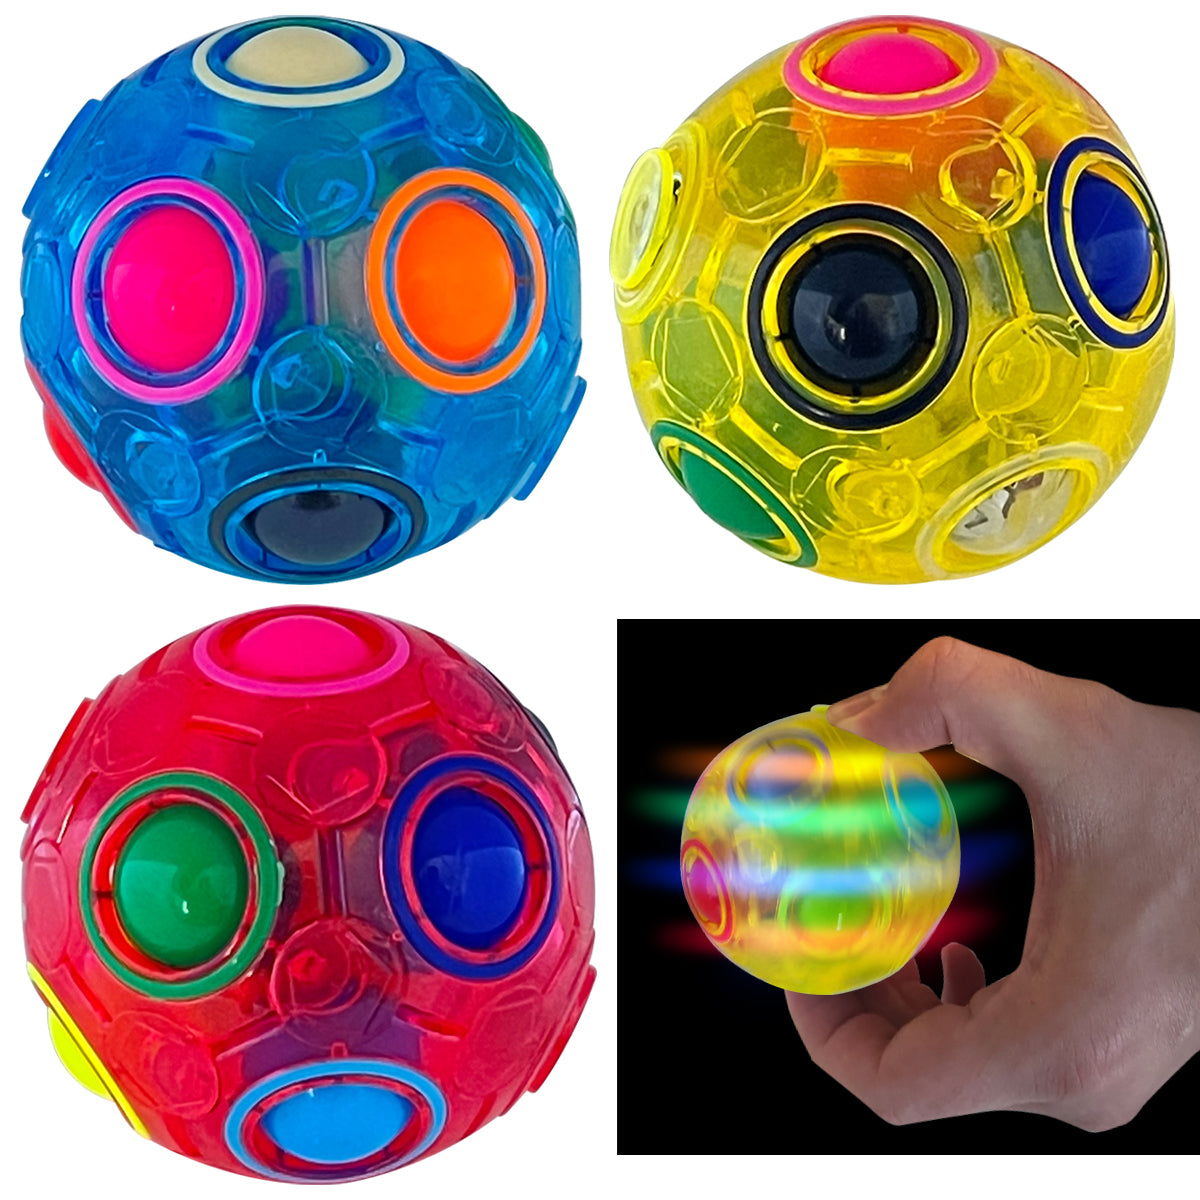 Puzzle Ball Brain Teasers for Kids Ages 6+, Fidget Travel Toy for Children